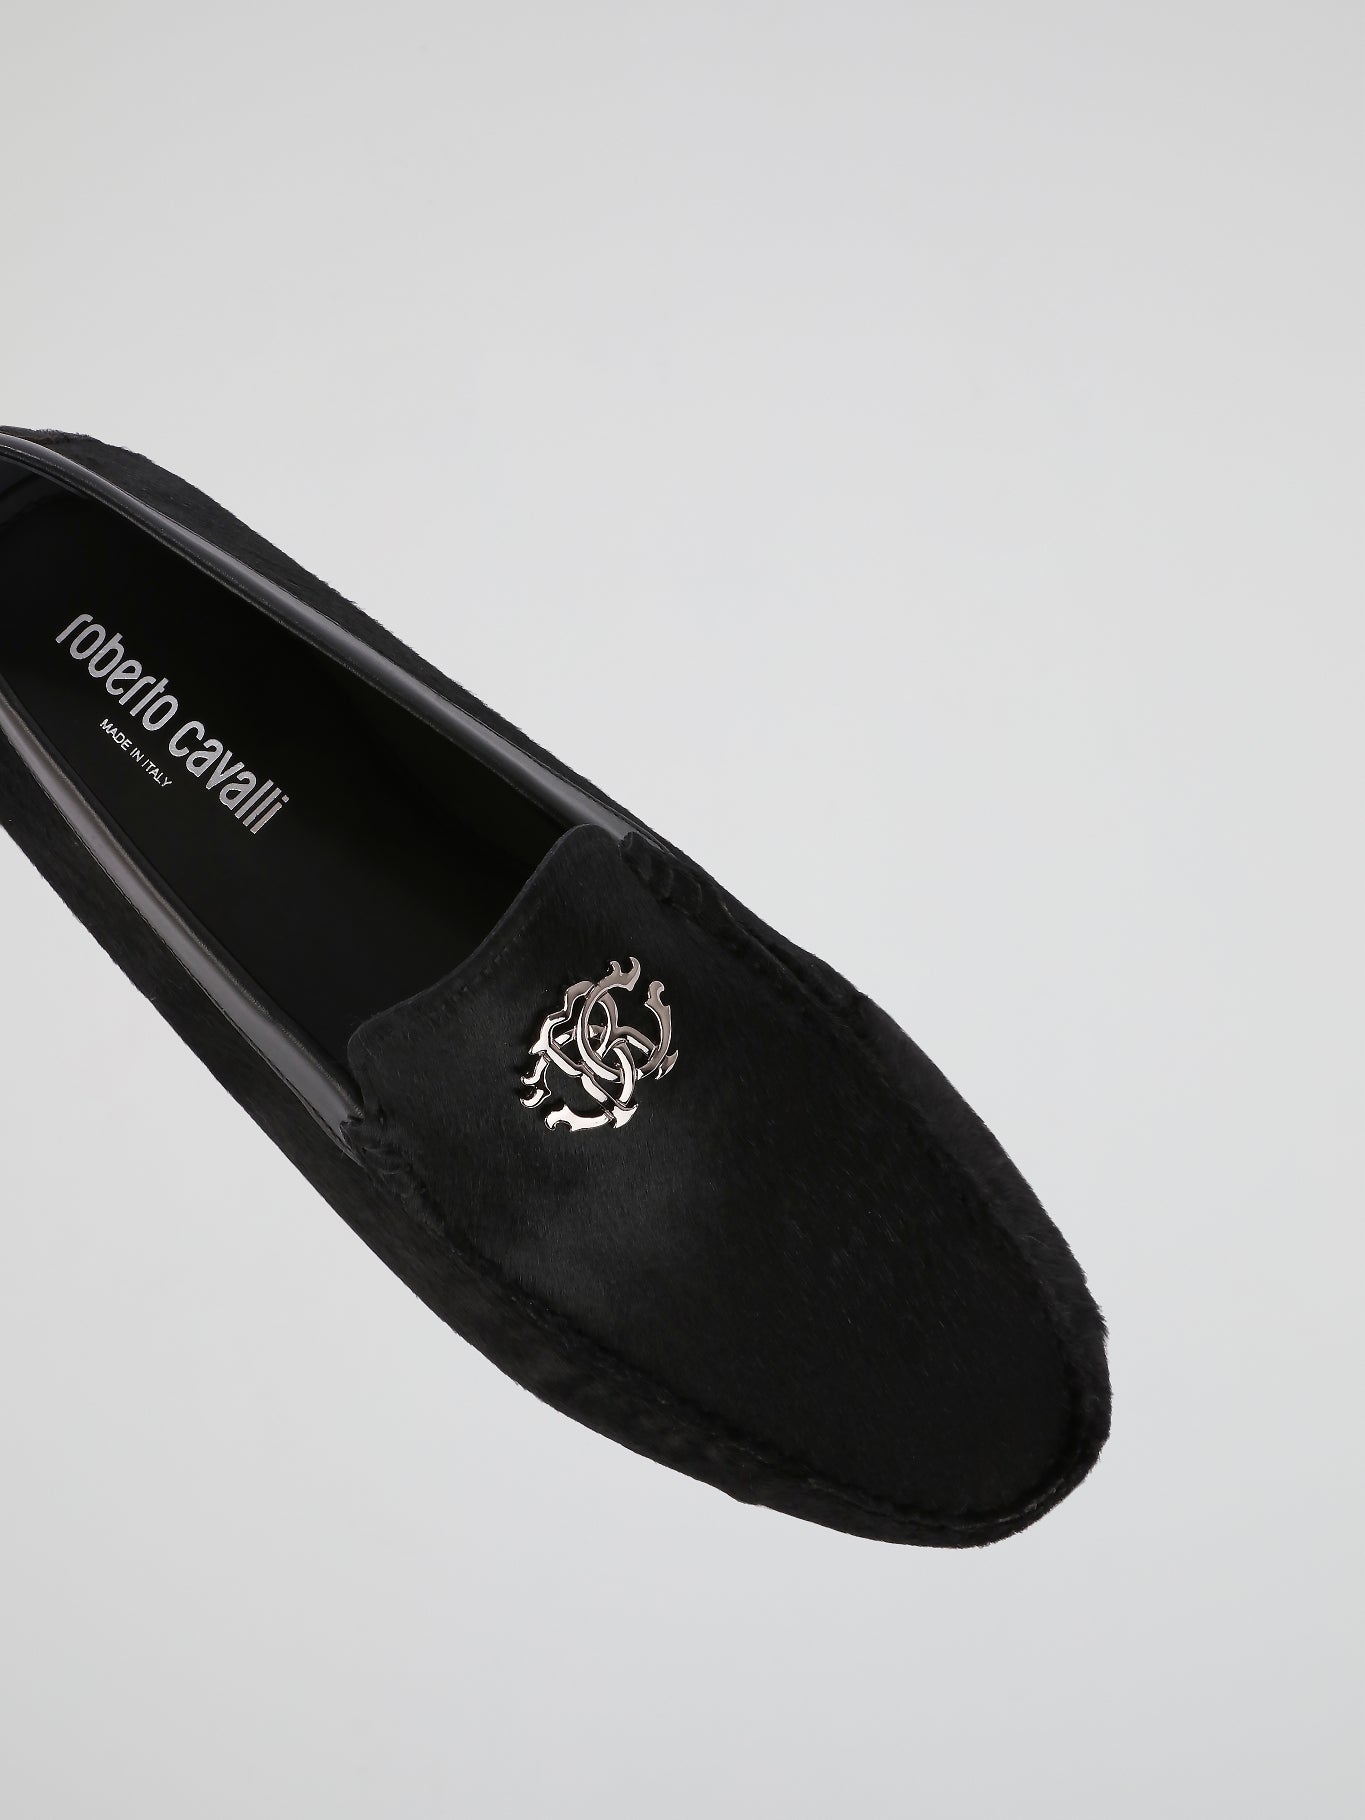 Black Goat Hair Loafers